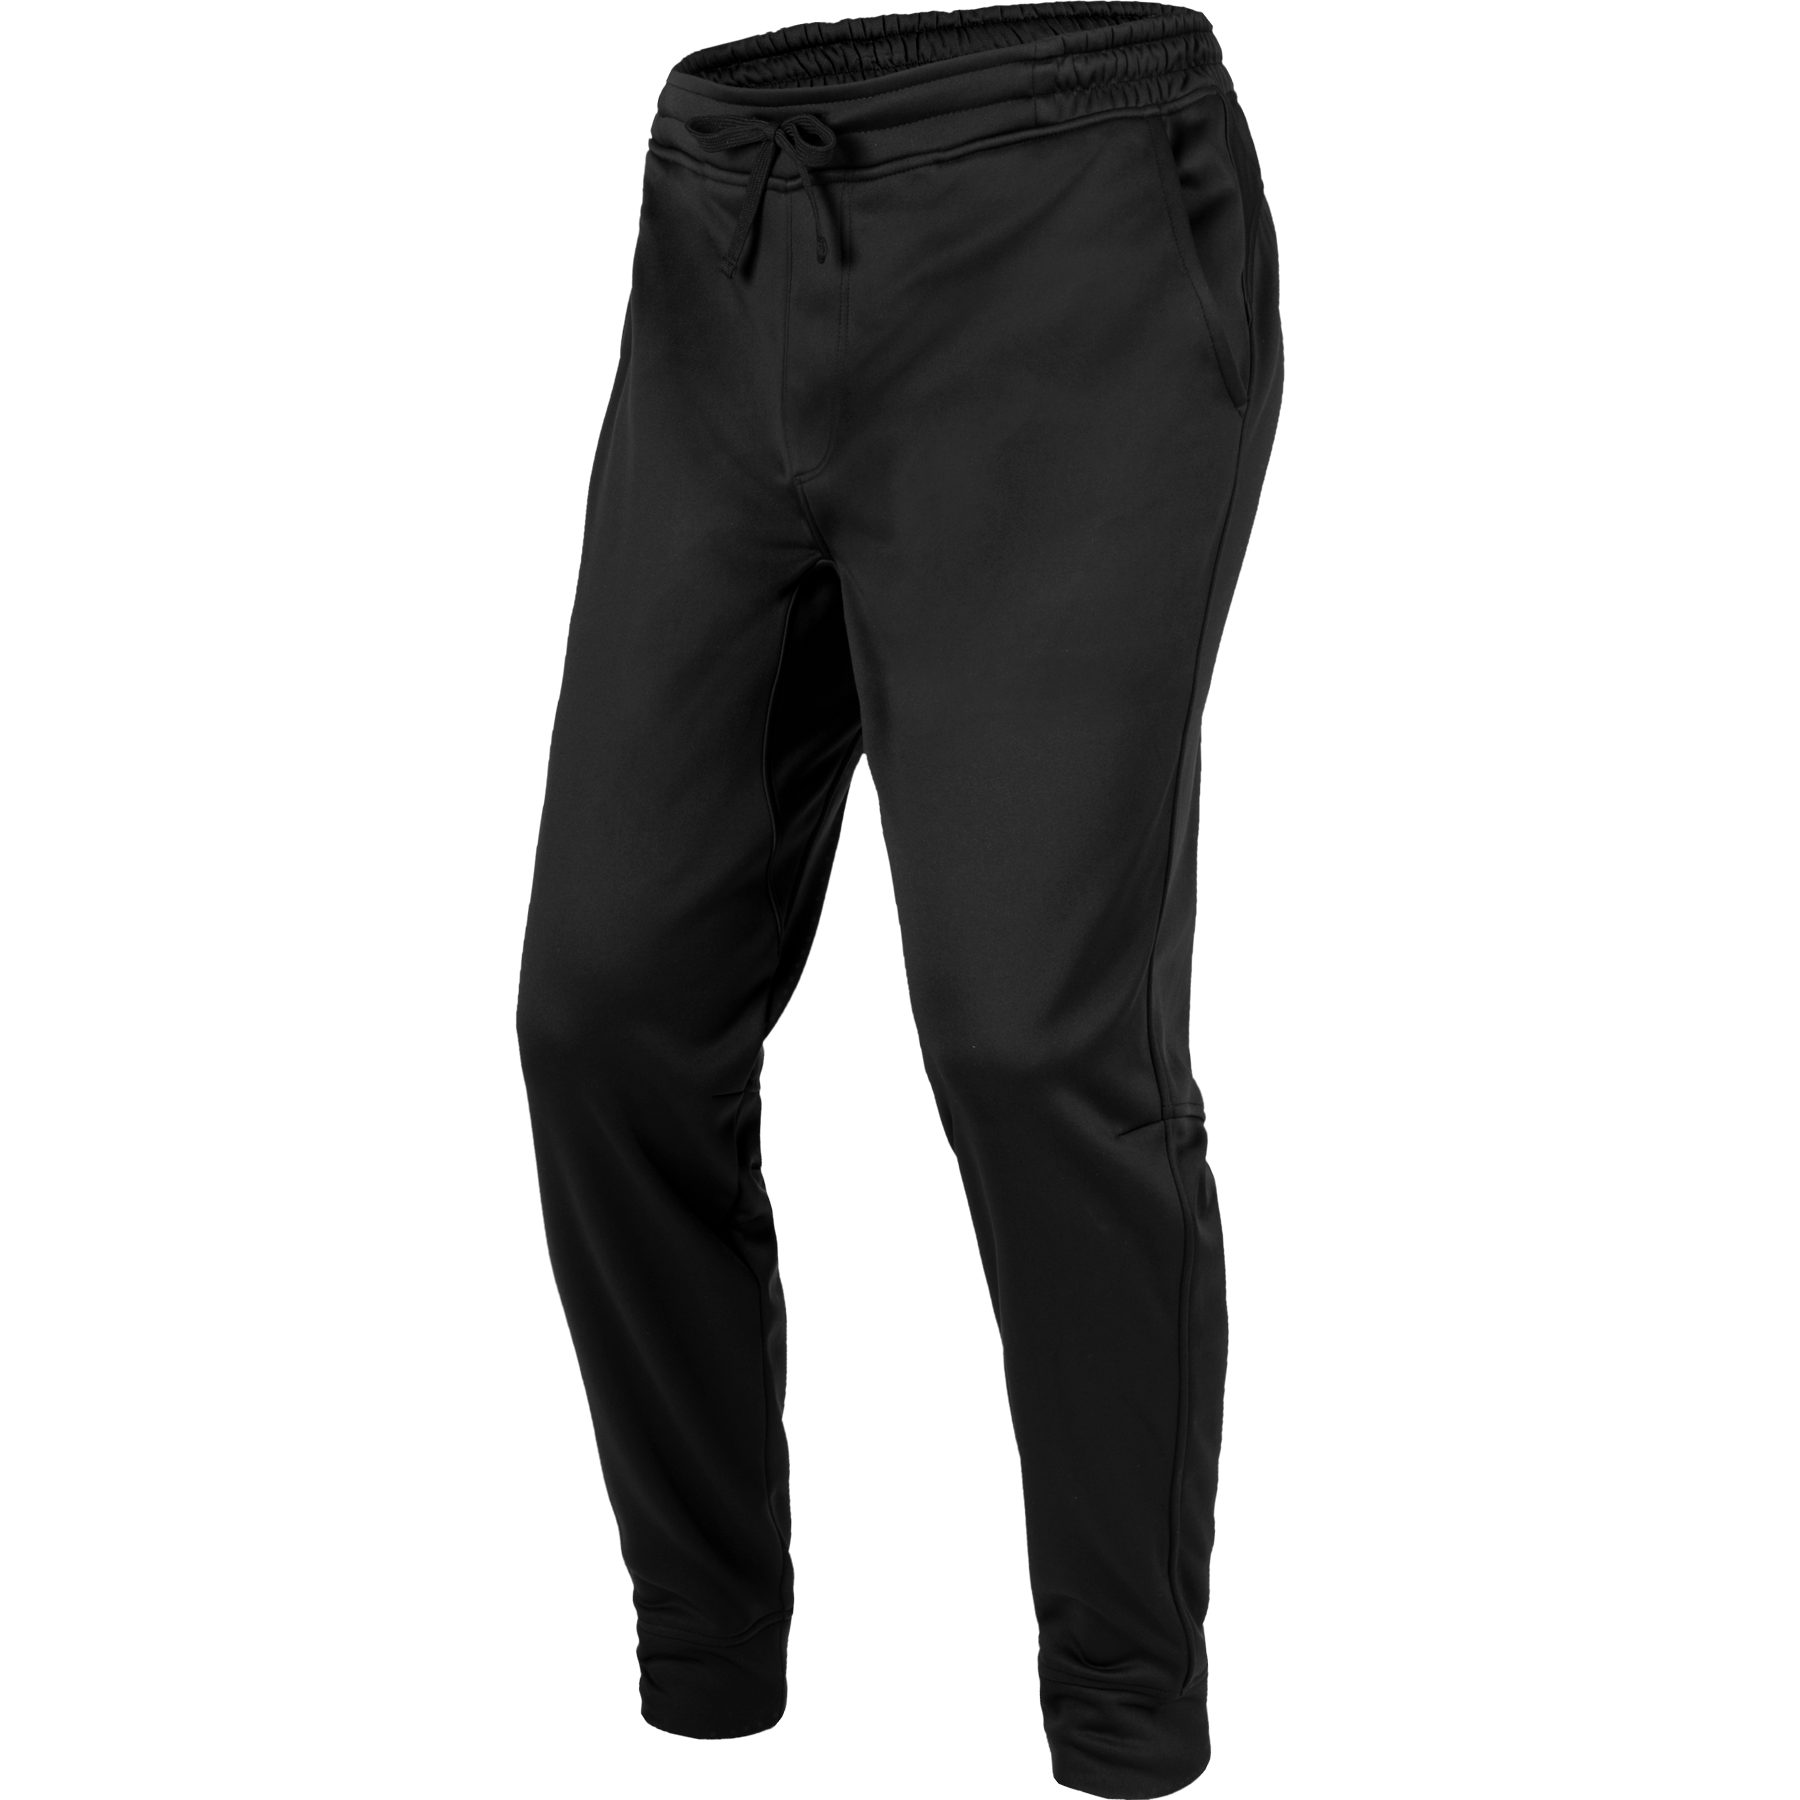 UNDER ARMOUR Checkered Men Black Track Pants - Buy UNDER ARMOUR